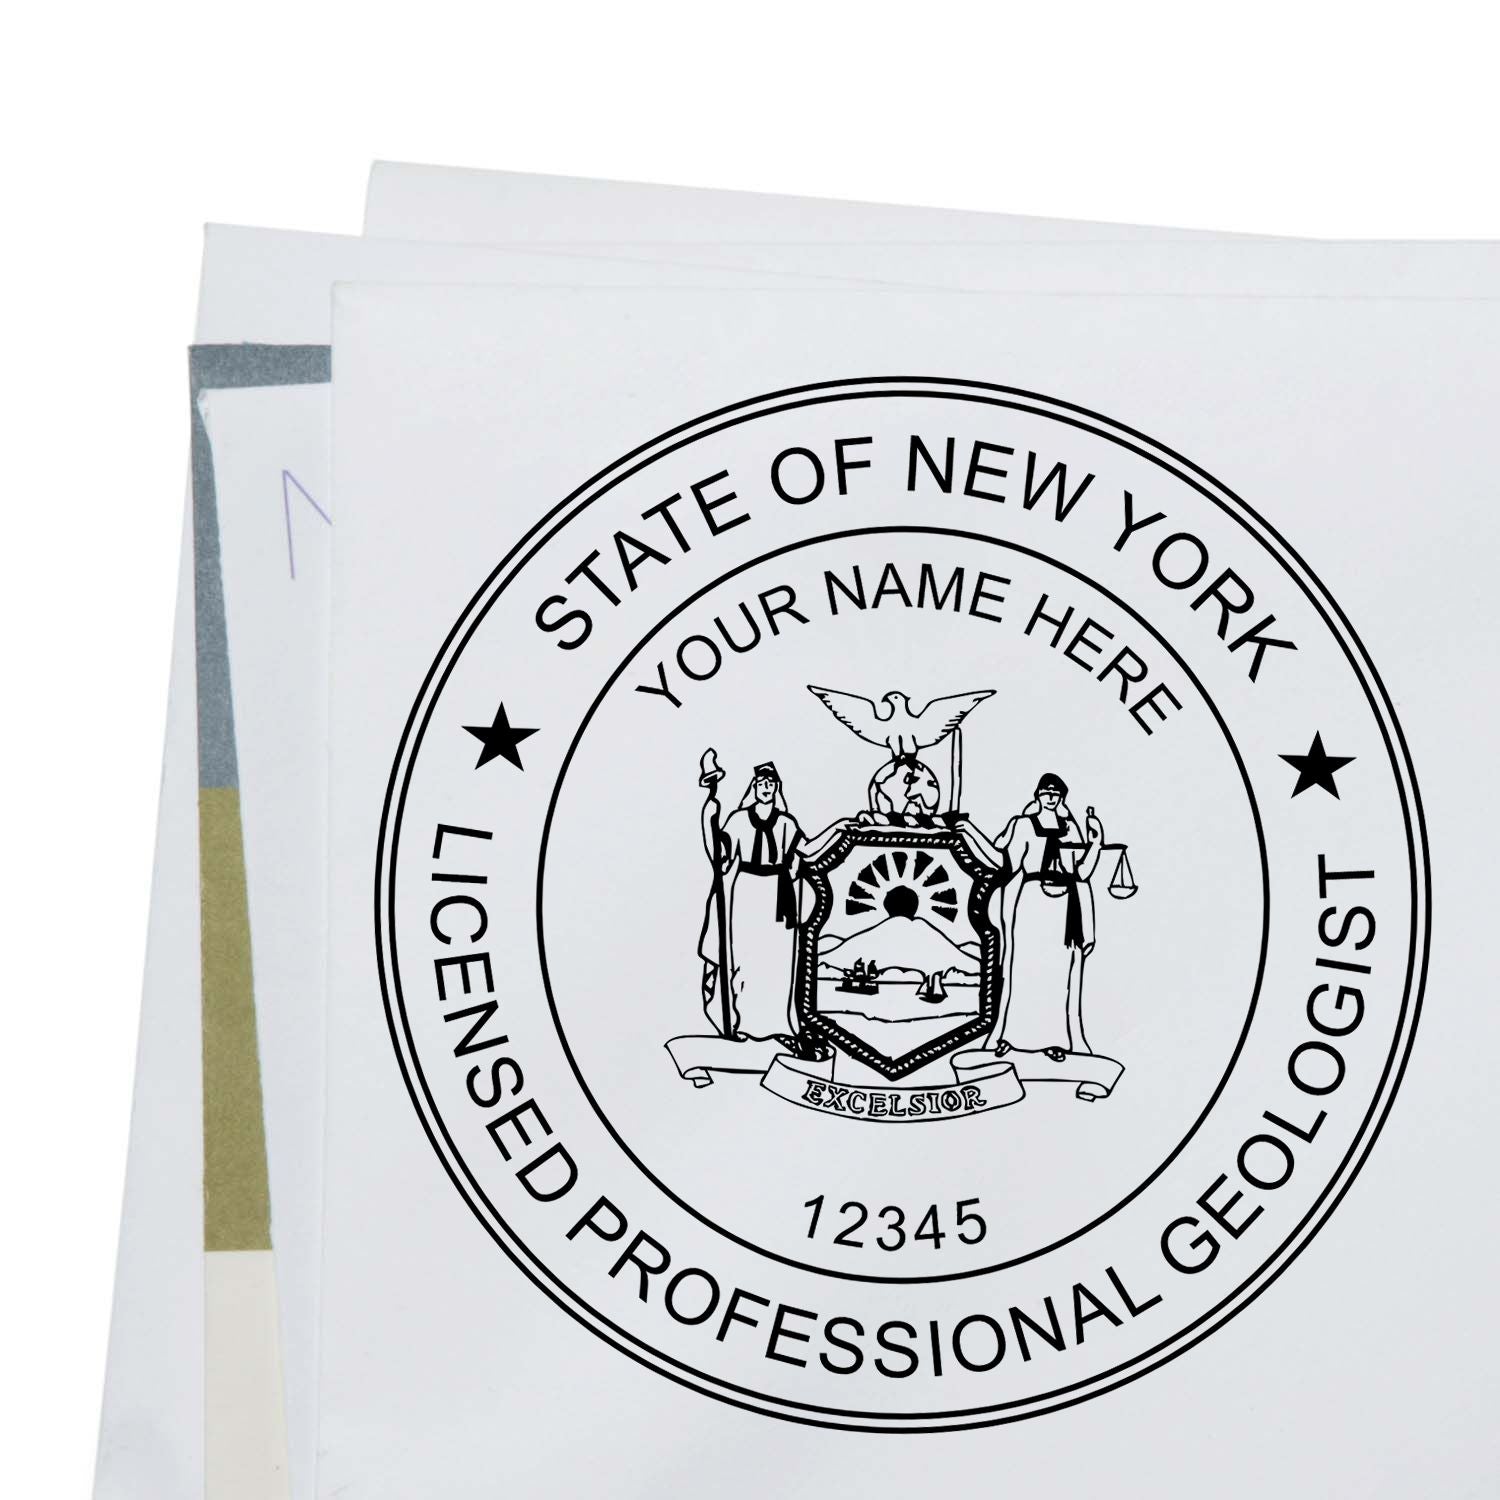 The main image for the Slim Pre-Inked New York Professional Geologist Seal Stamp depicting a sample of the imprint and imprint sample